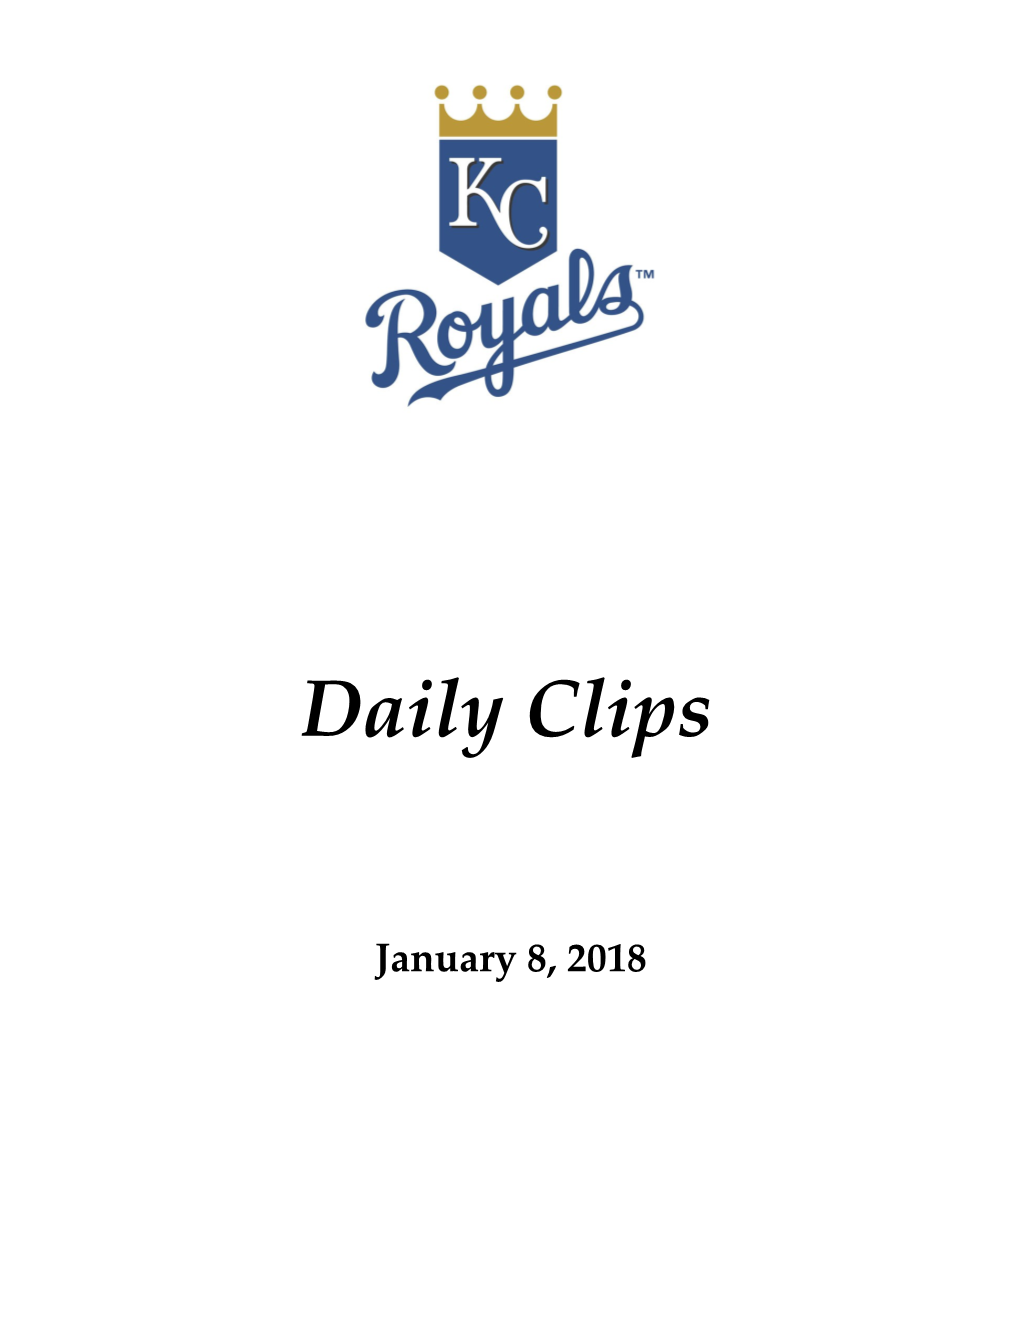 How Royals' 2018 Starting Lineup Looks Today